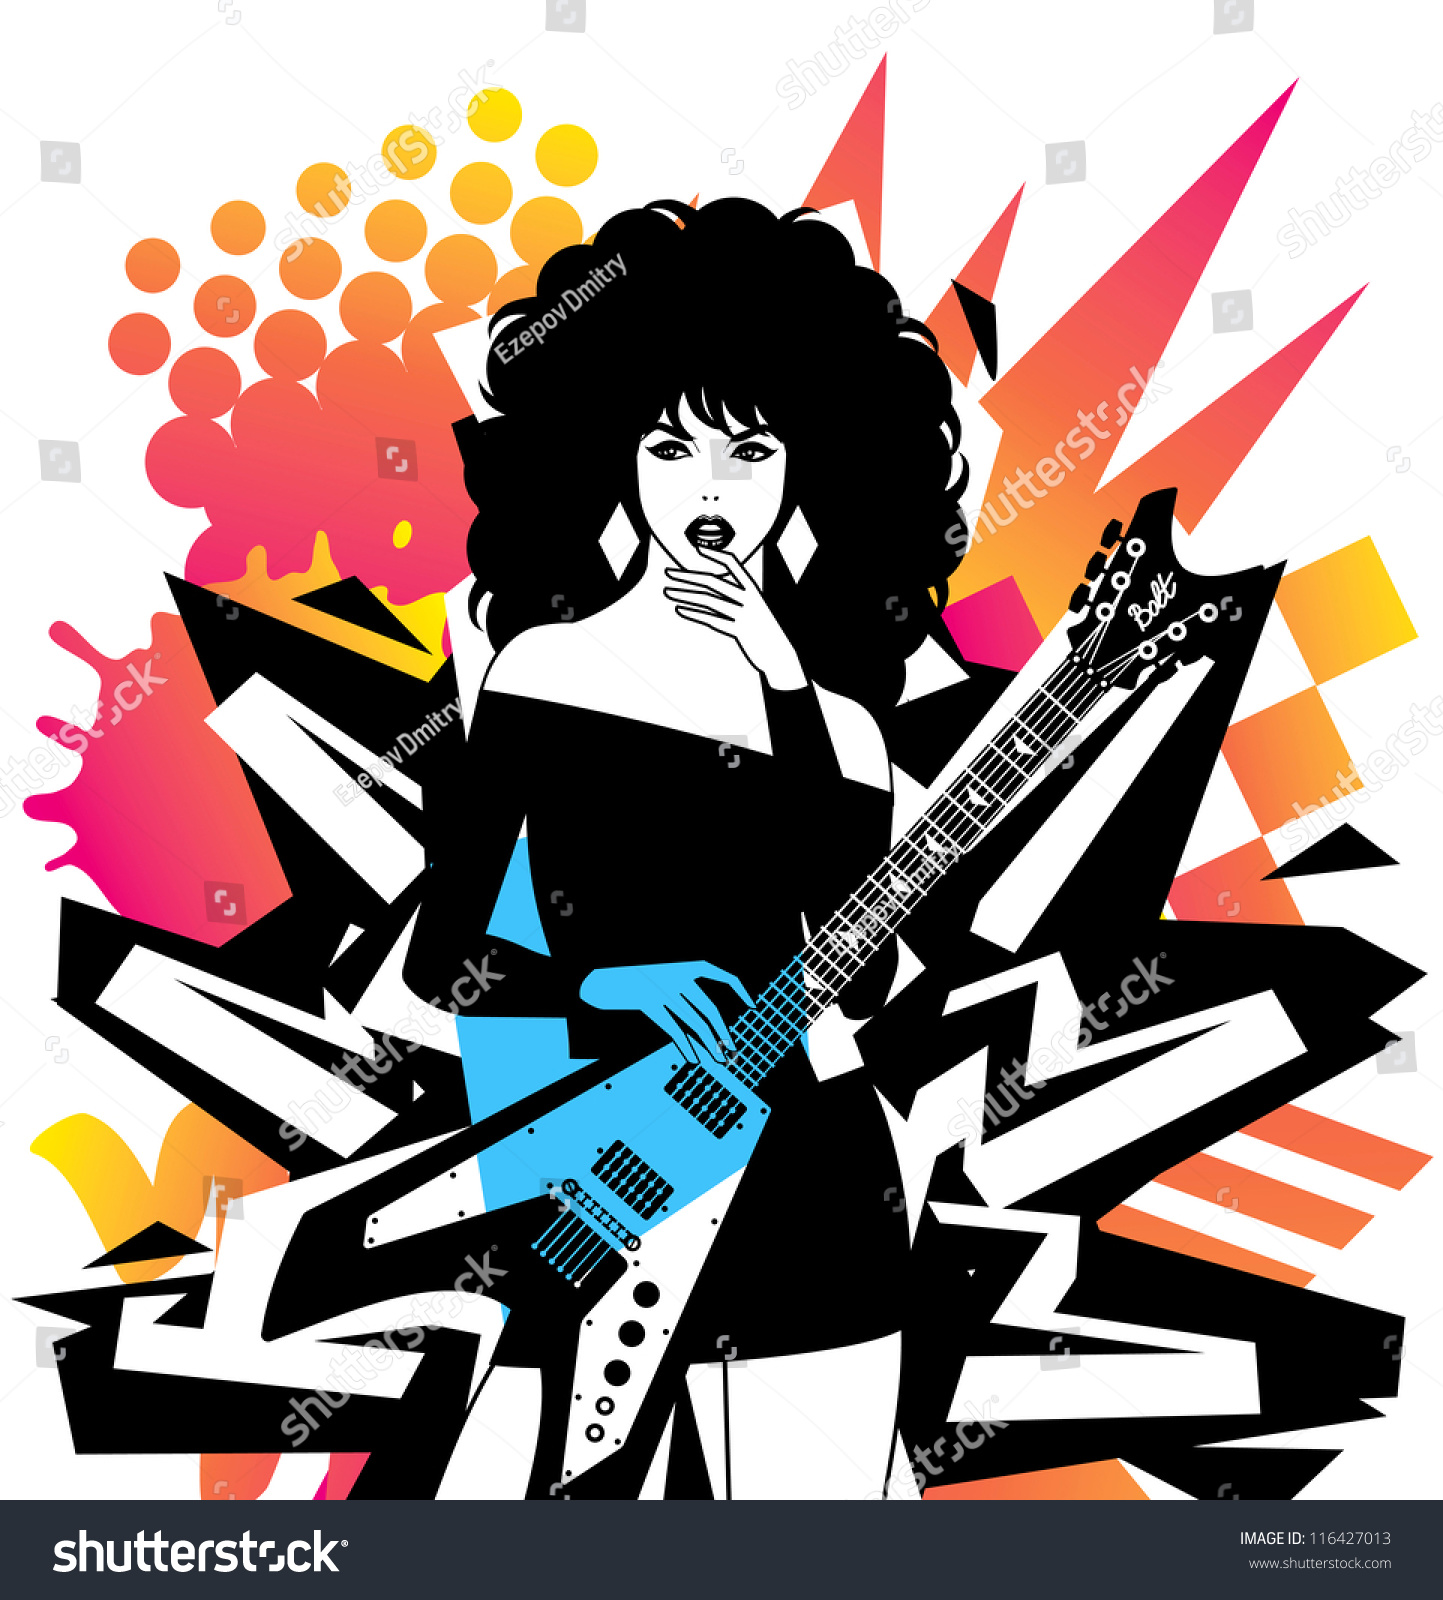 stock vector woman with guitar